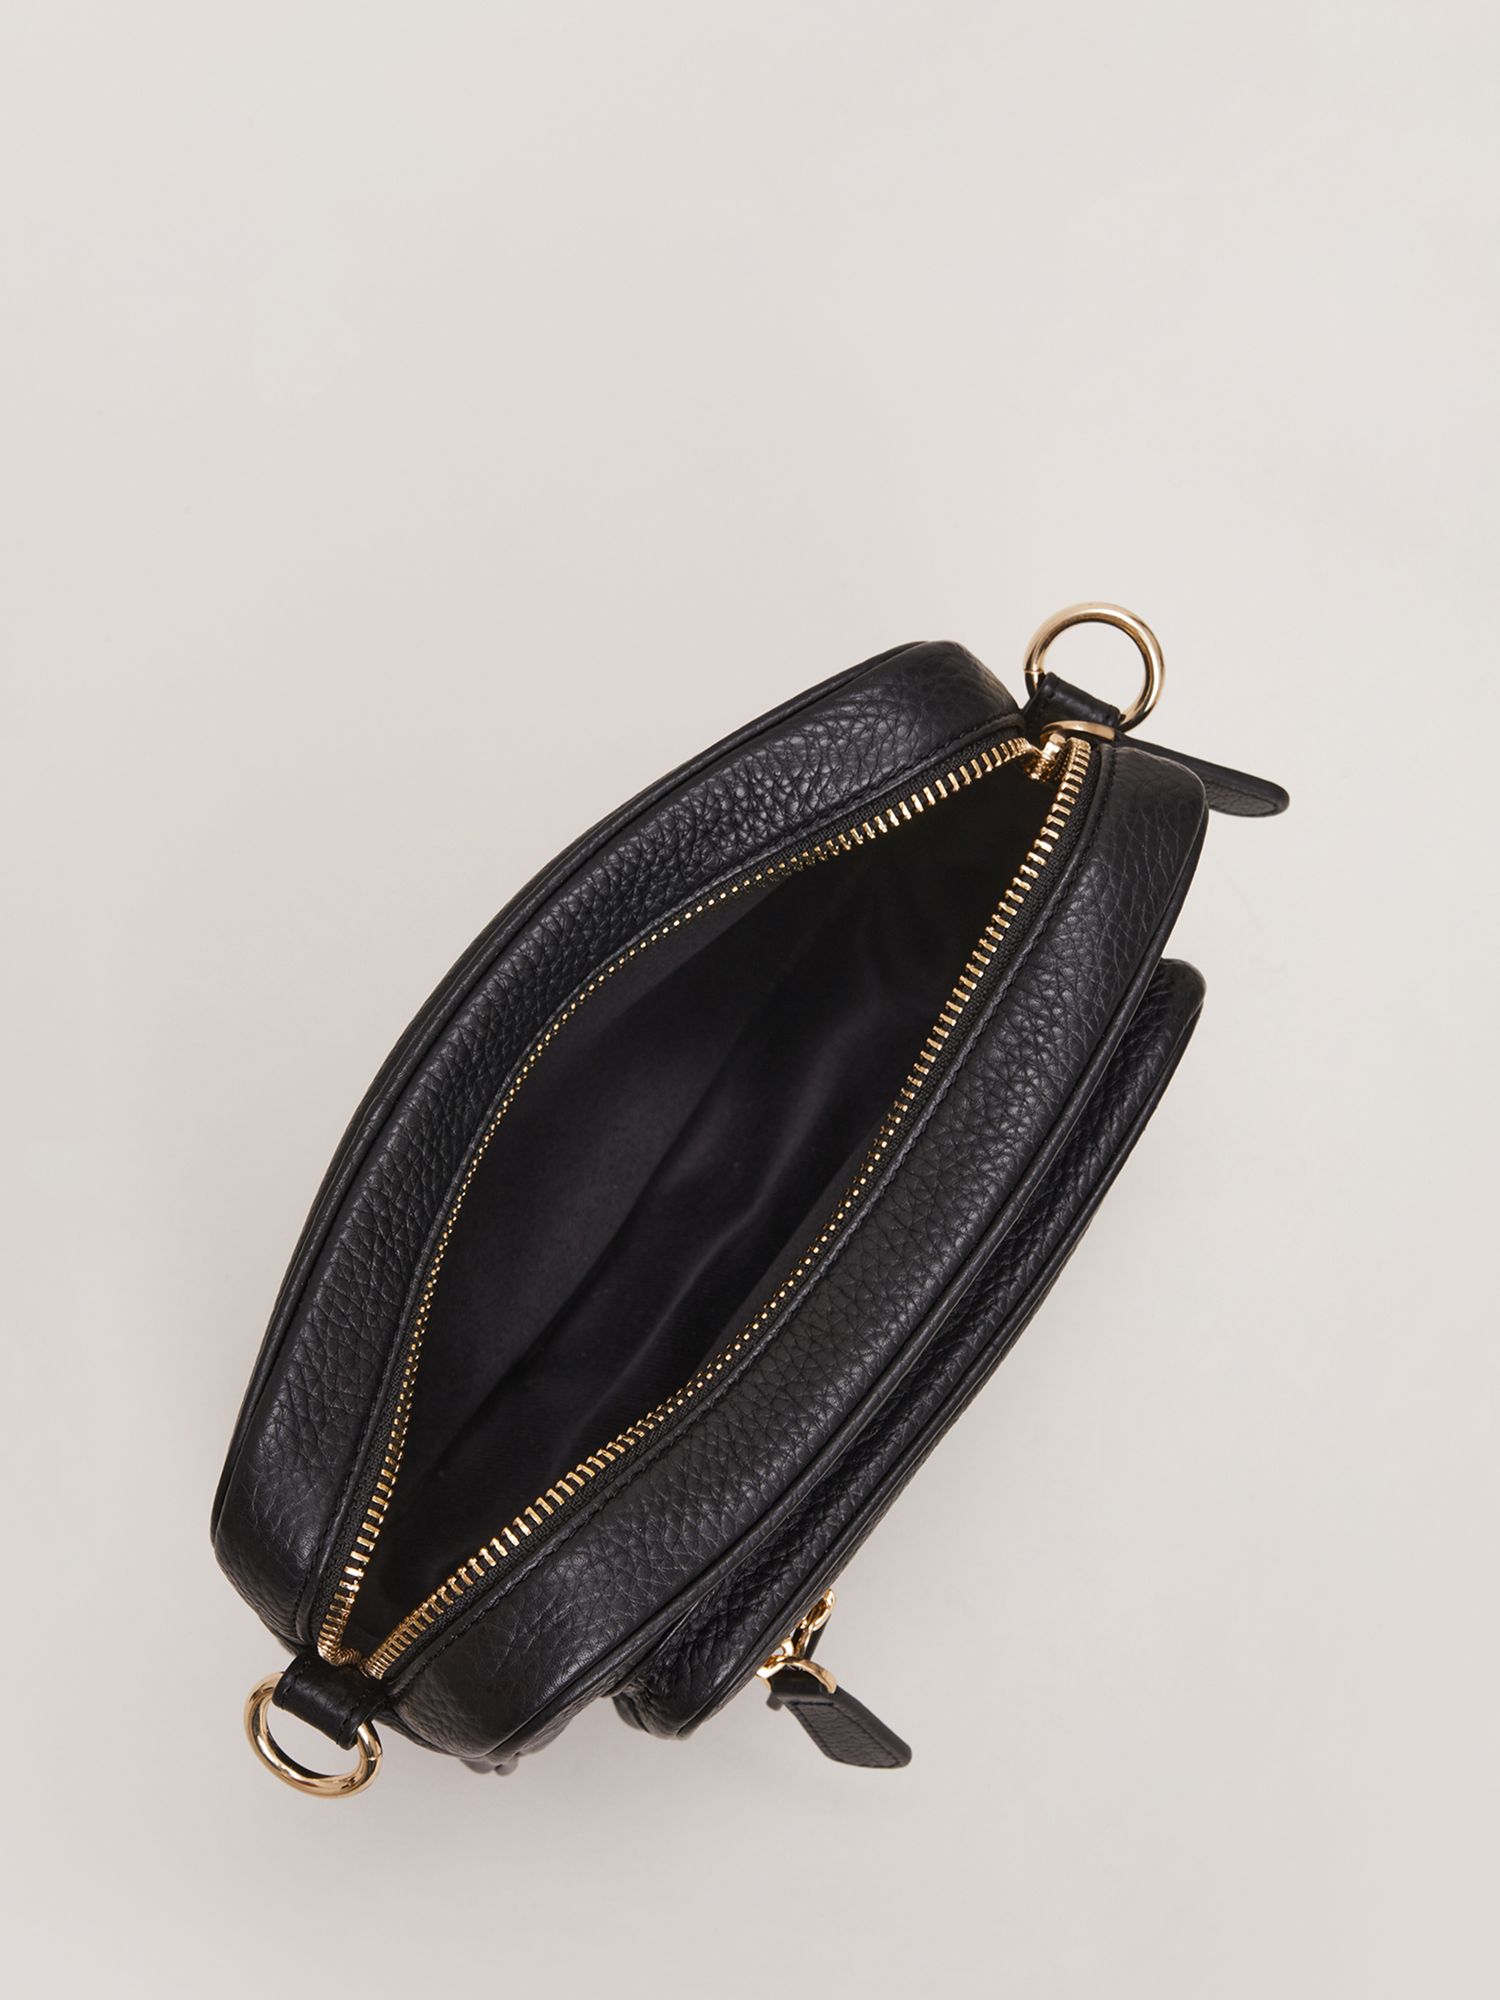 Buy Phase Eight Leather Cross Body Bag, Black Online at johnlewis.com